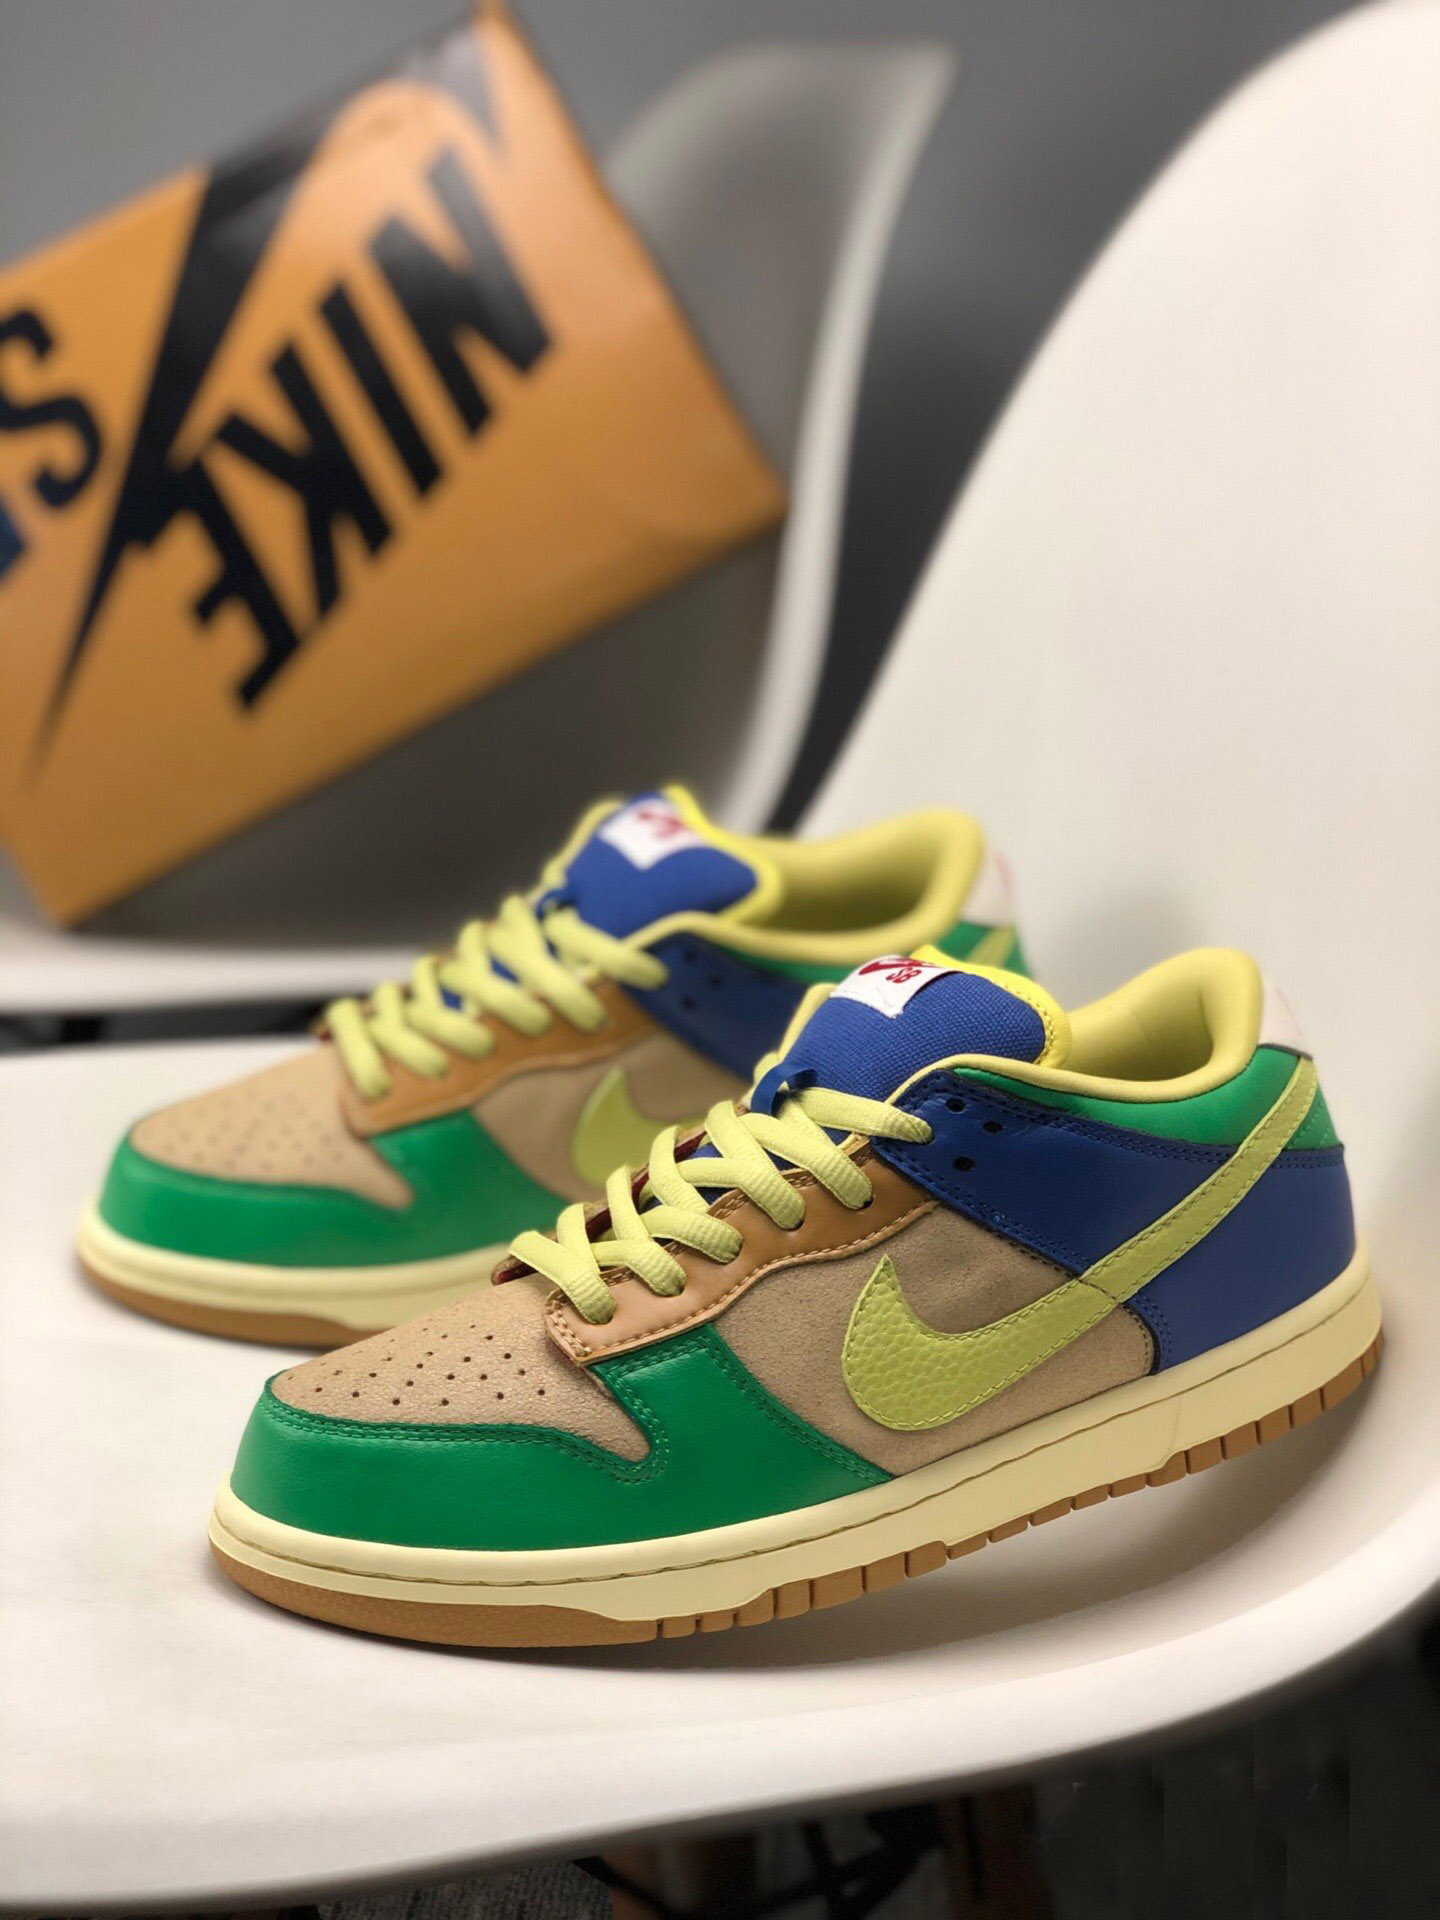 Brooklyn Projects x Nike SB Dunk Low Premium Halo/Zitron Shoes